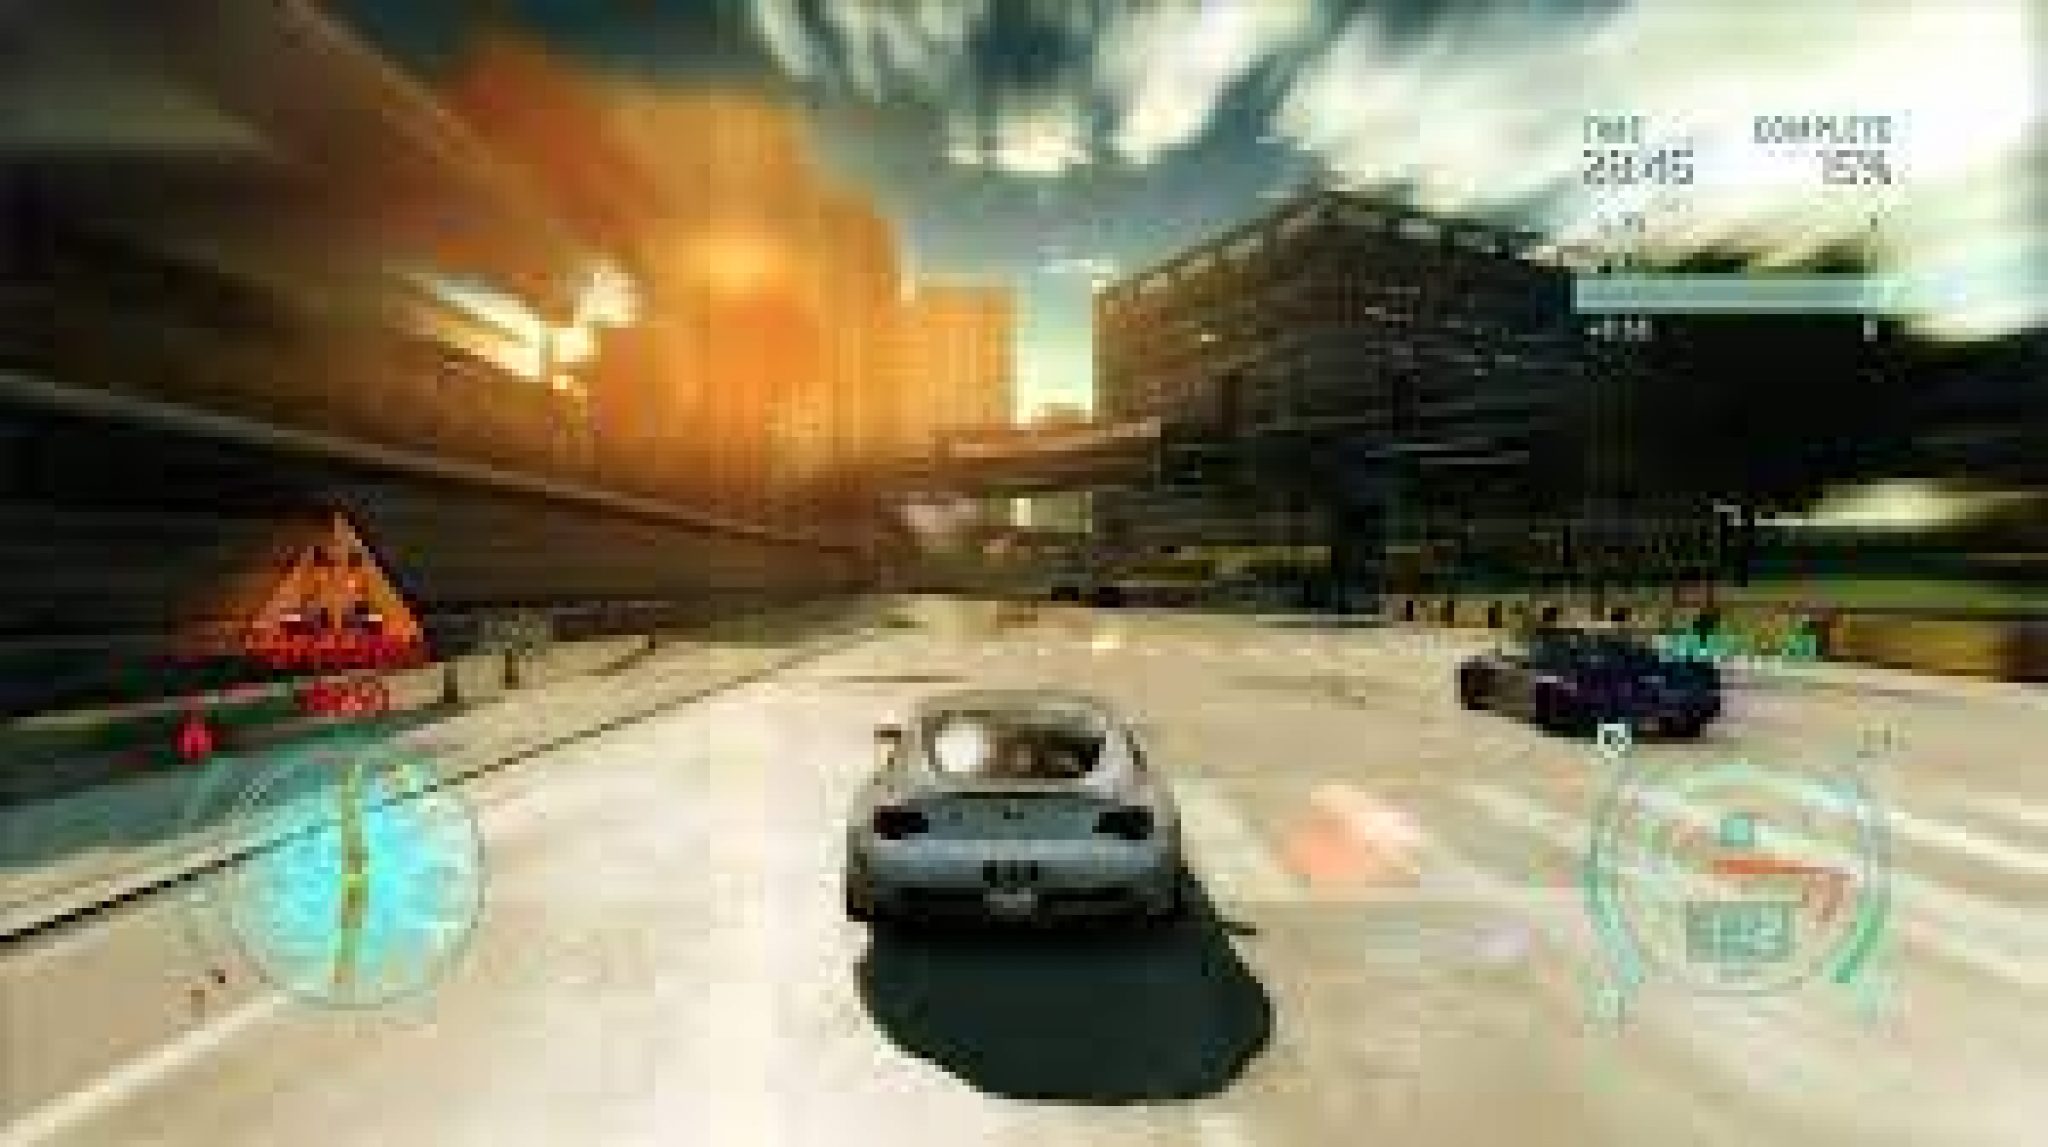 need for speed undercover download free